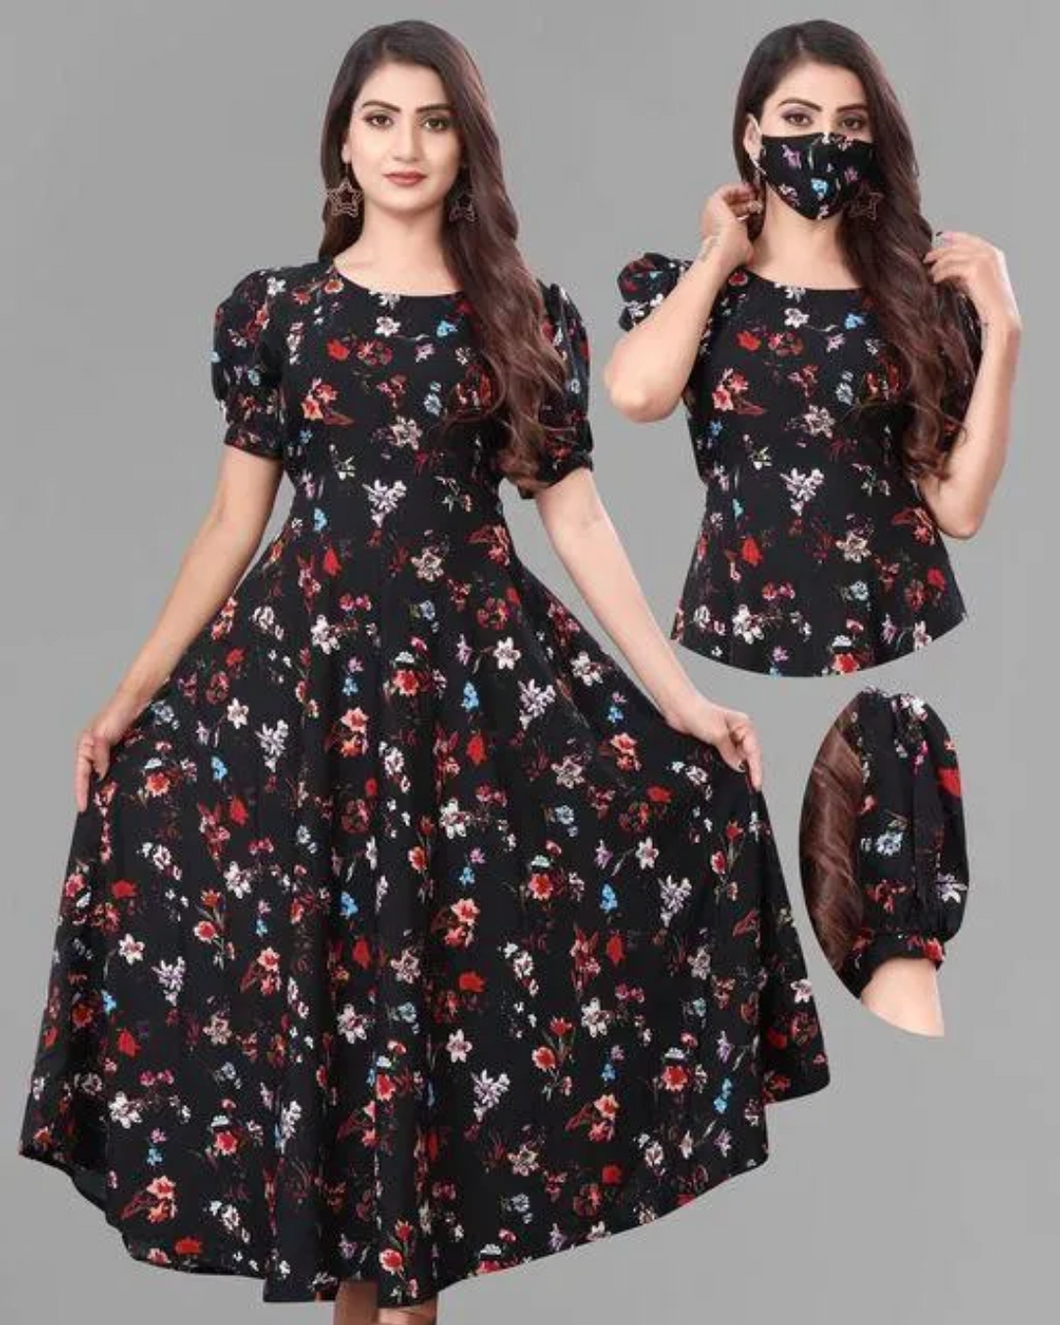 Celebrity Style Women Western Dresses (S to 5XL Size Available)